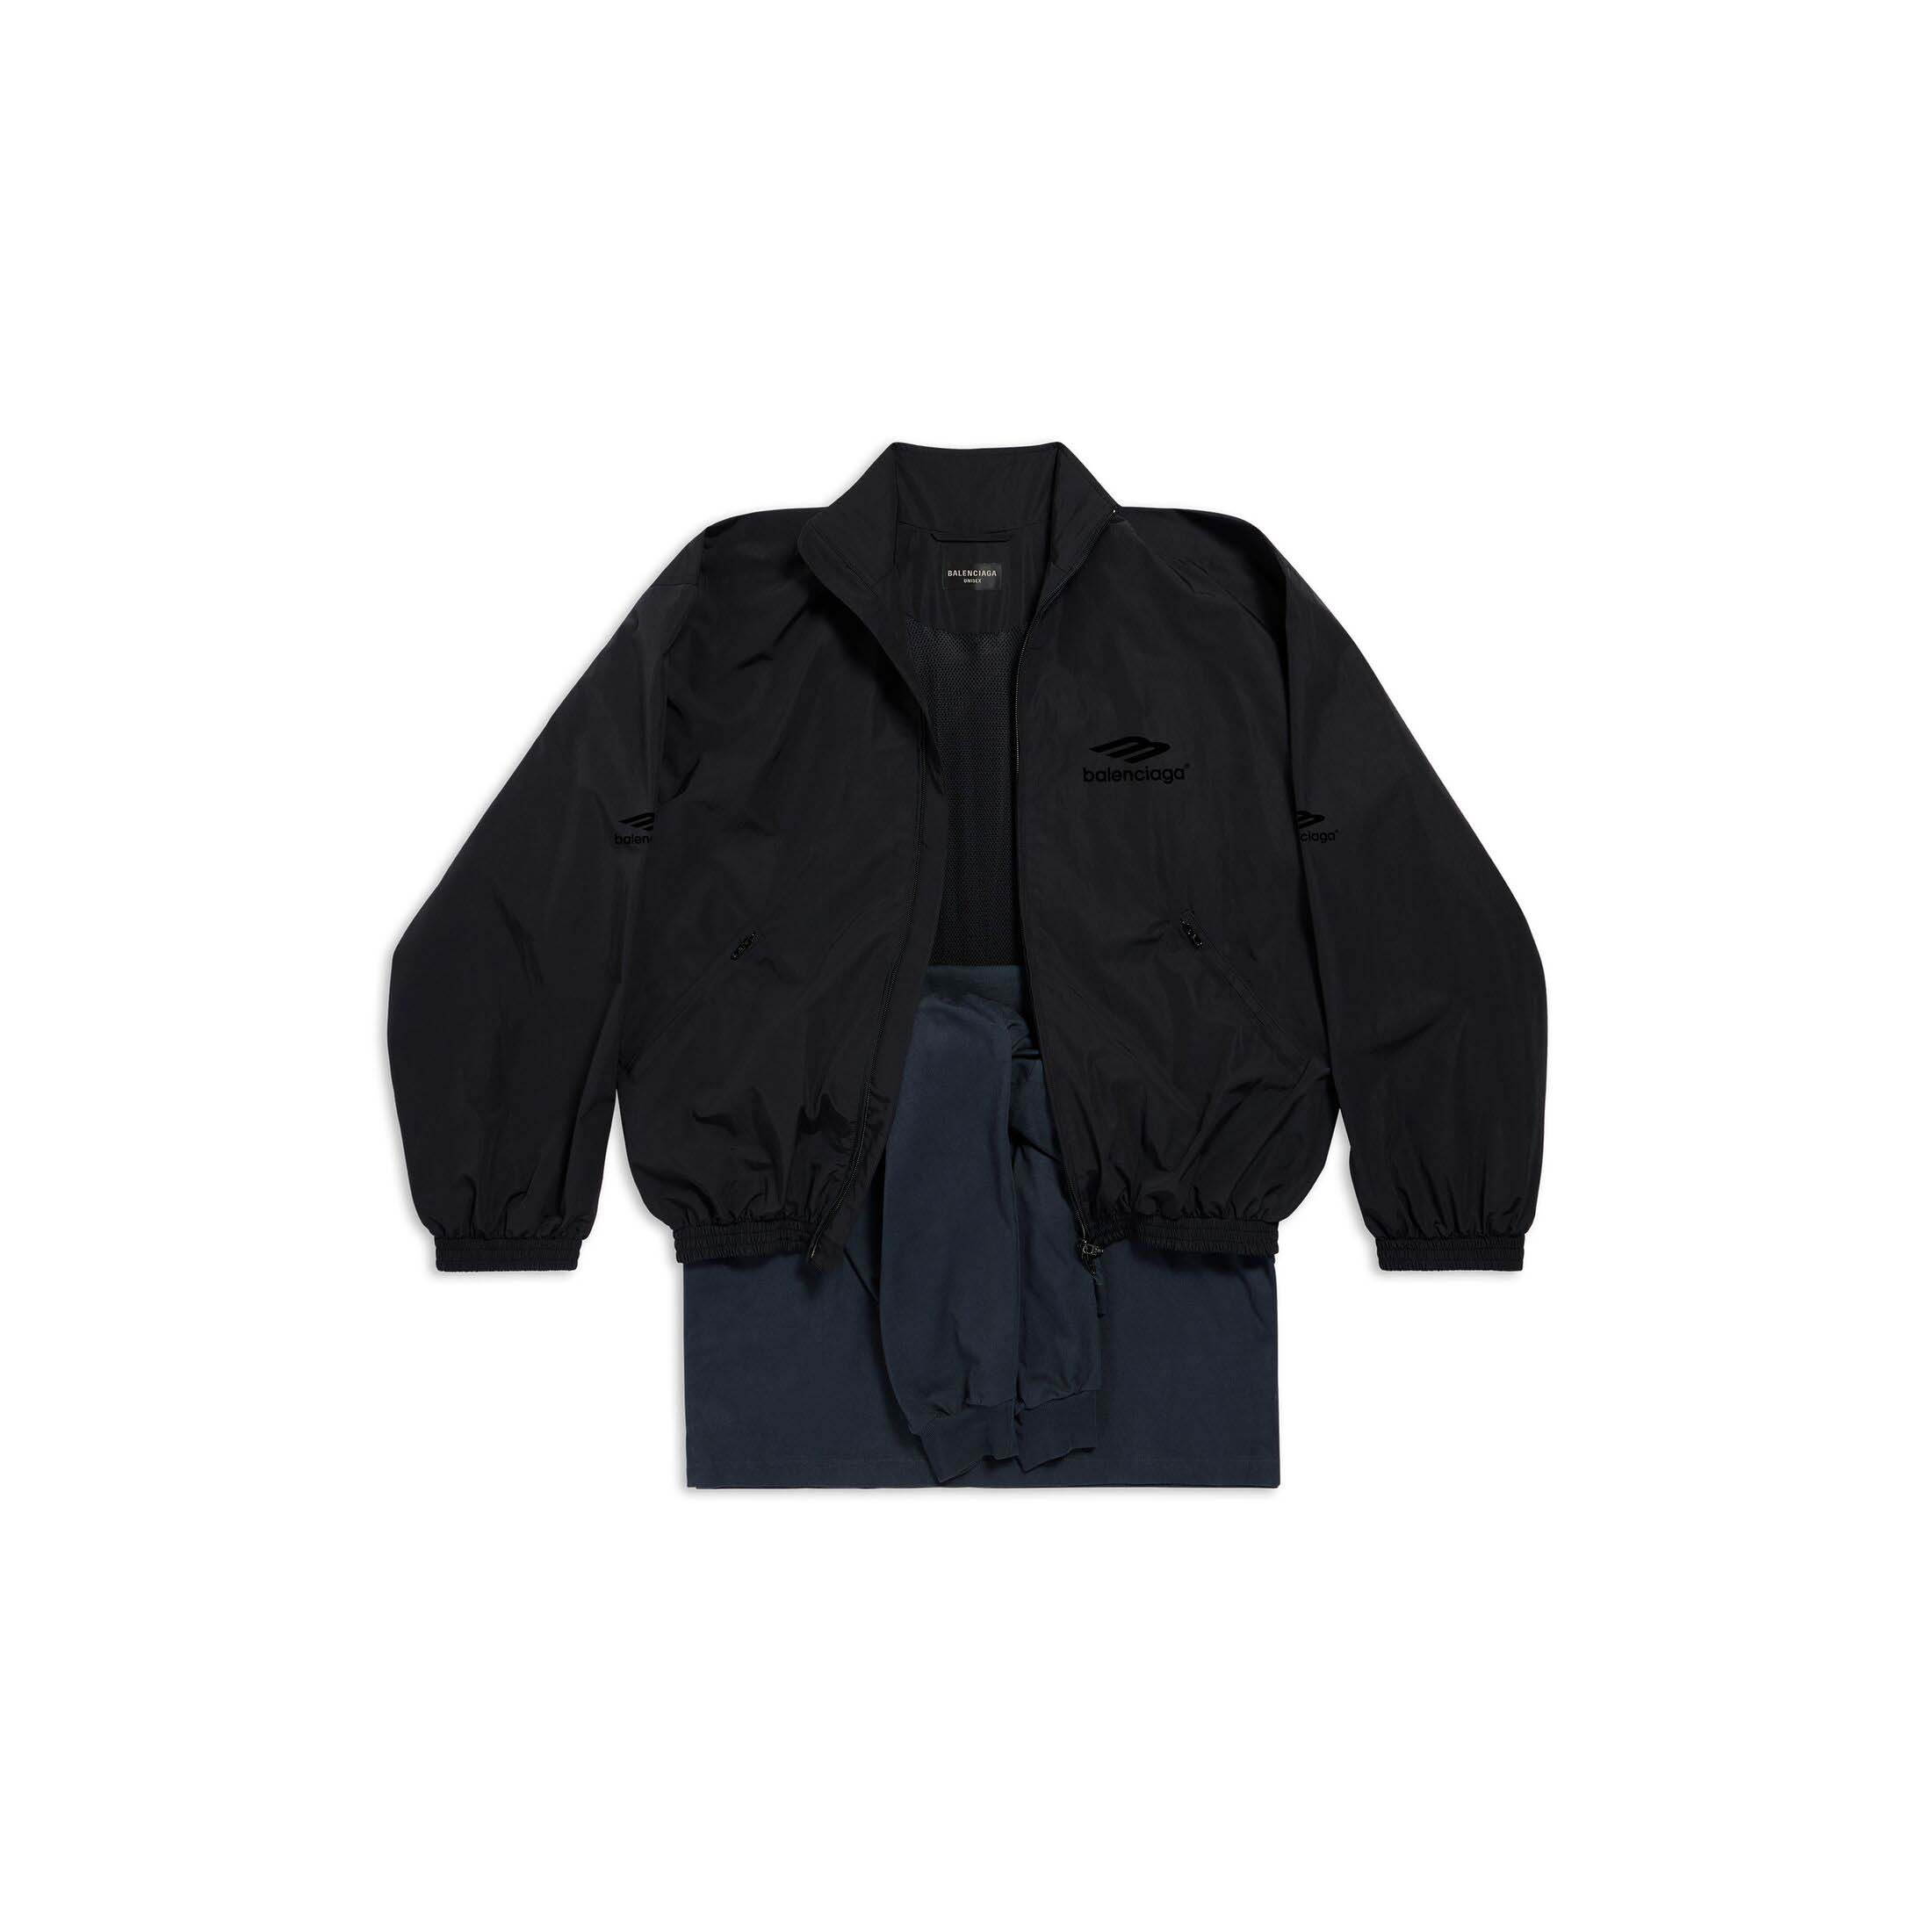 Balenciaga Patched Tracksuit Jacket in Black Black メンズ - FW23 - JP